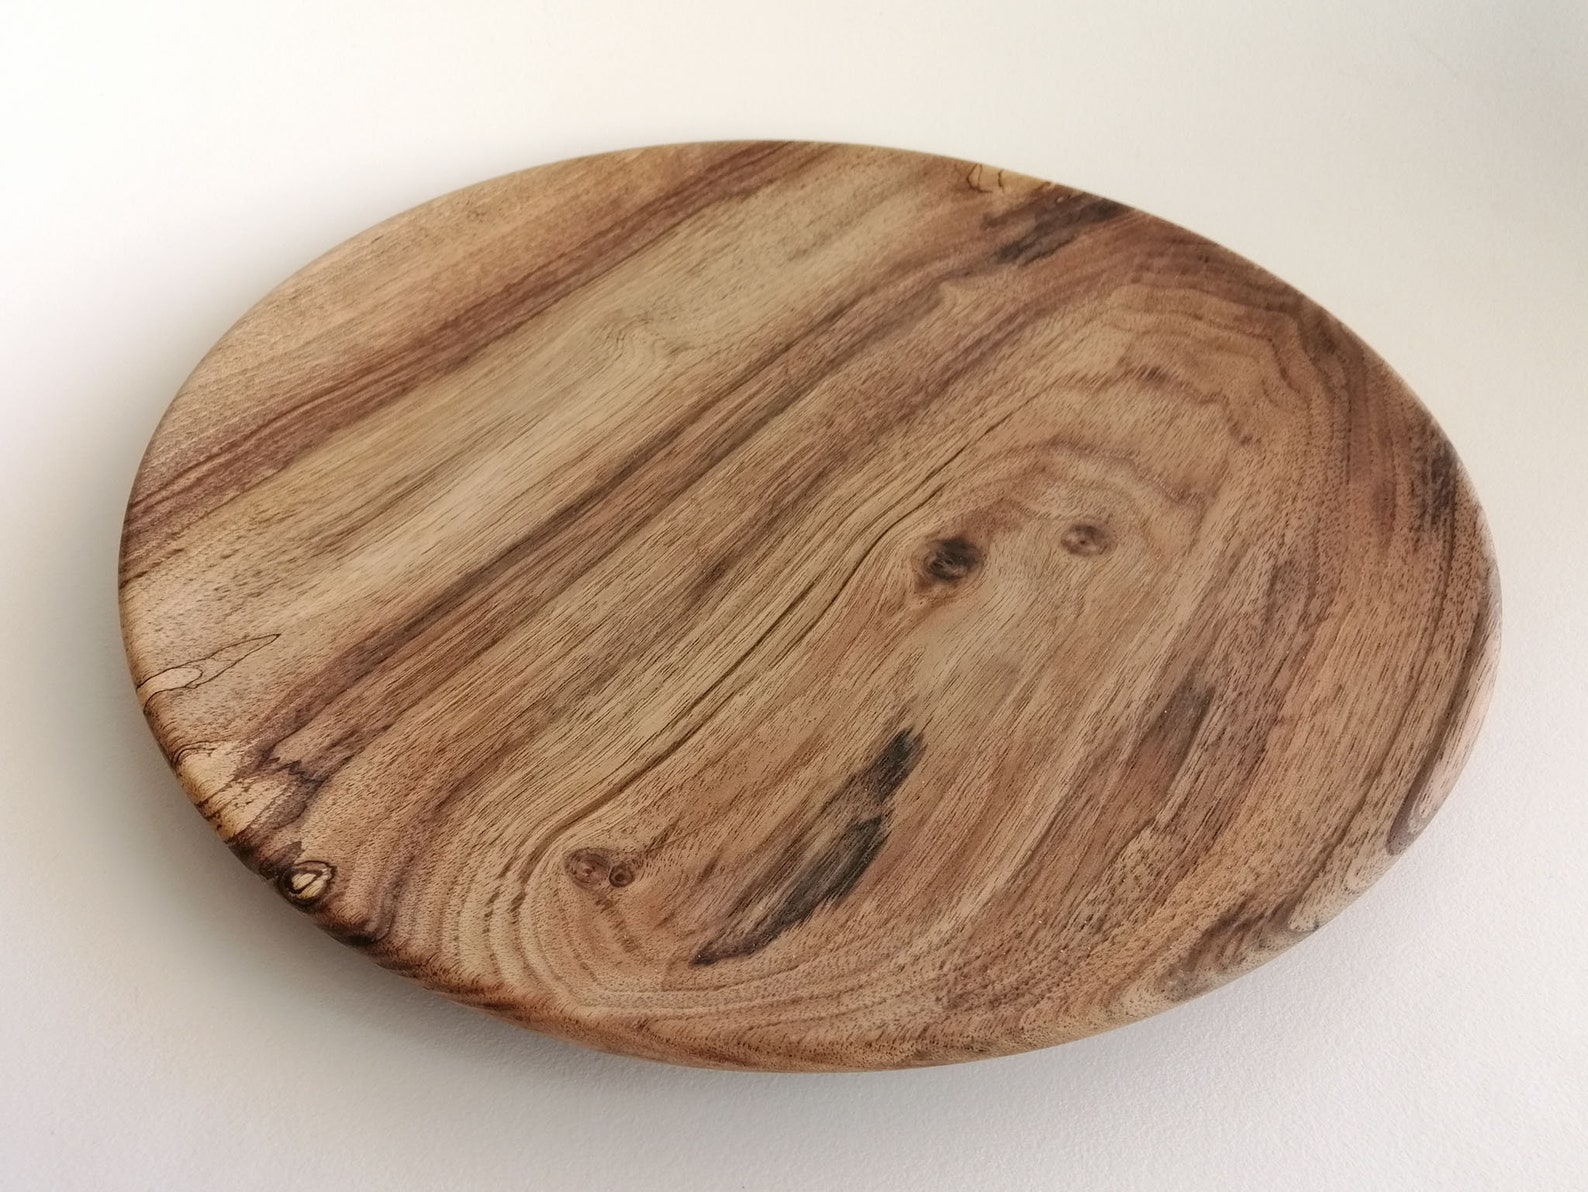 Плоская тарелка из дерева. Тарелка плоская из пня. Walnut in a Plate. Flat plate